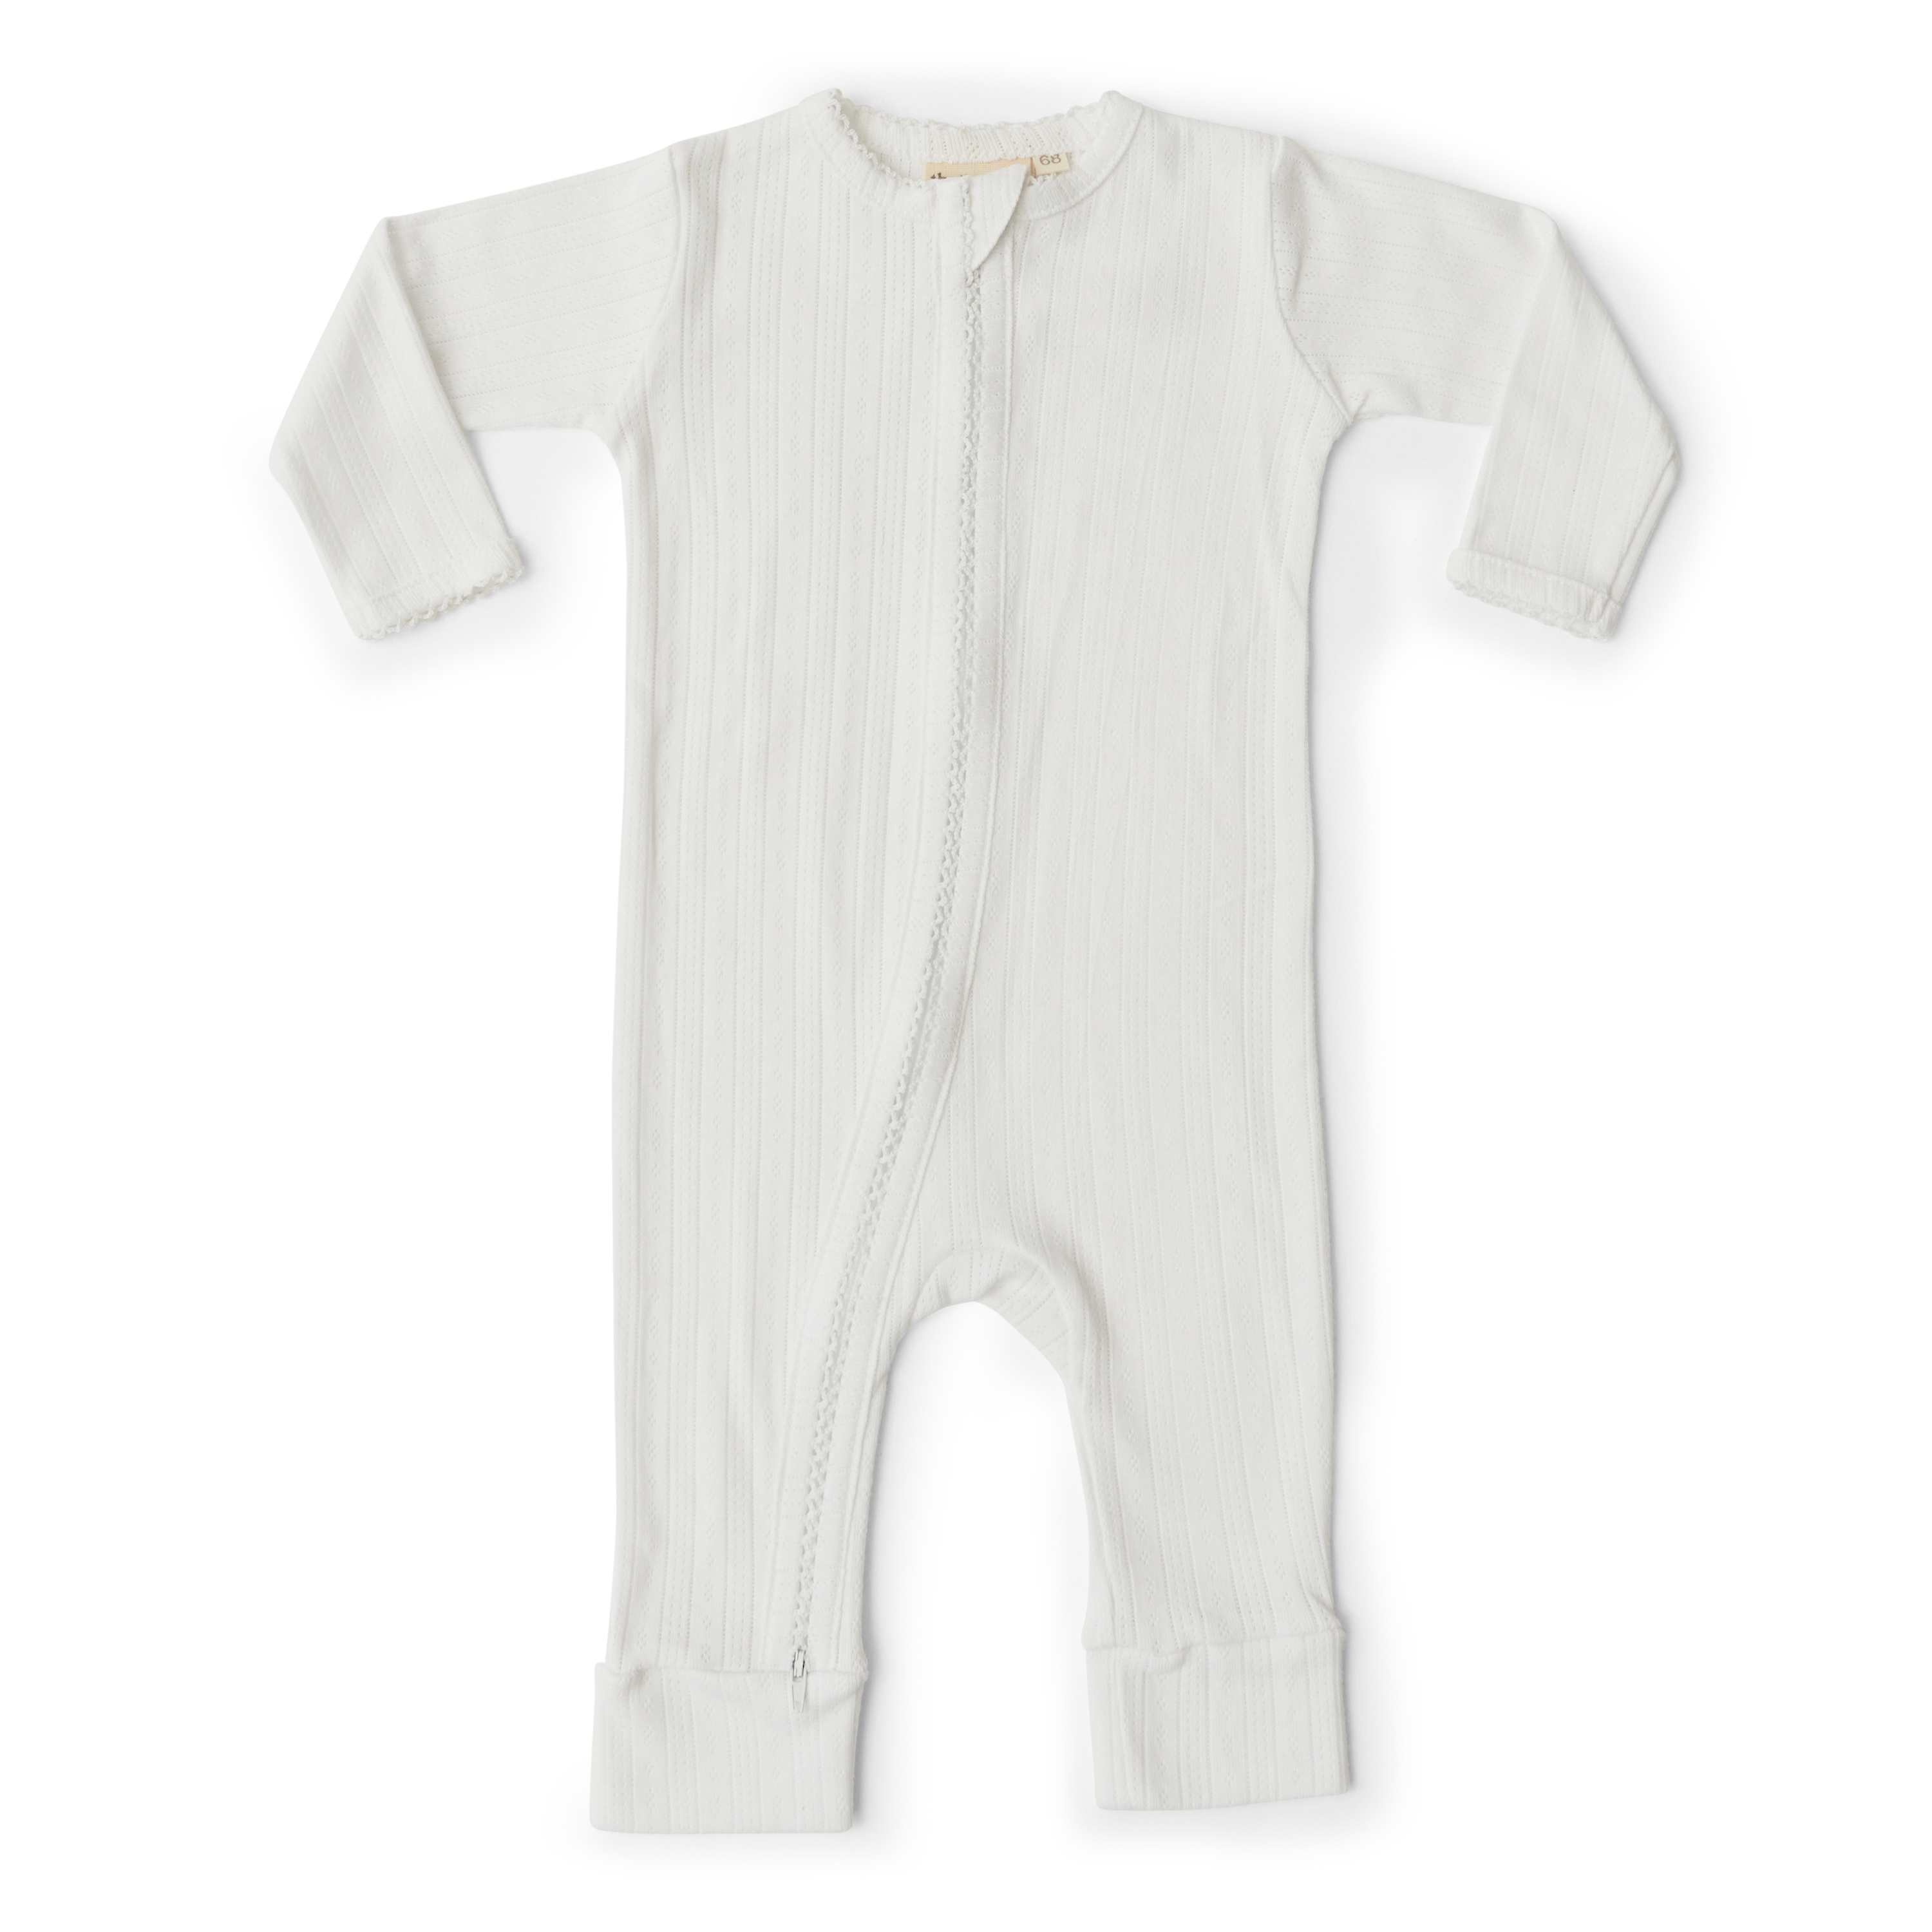 MAMA.LICIOUS Baby one-piece suit -Antique White - 88888866